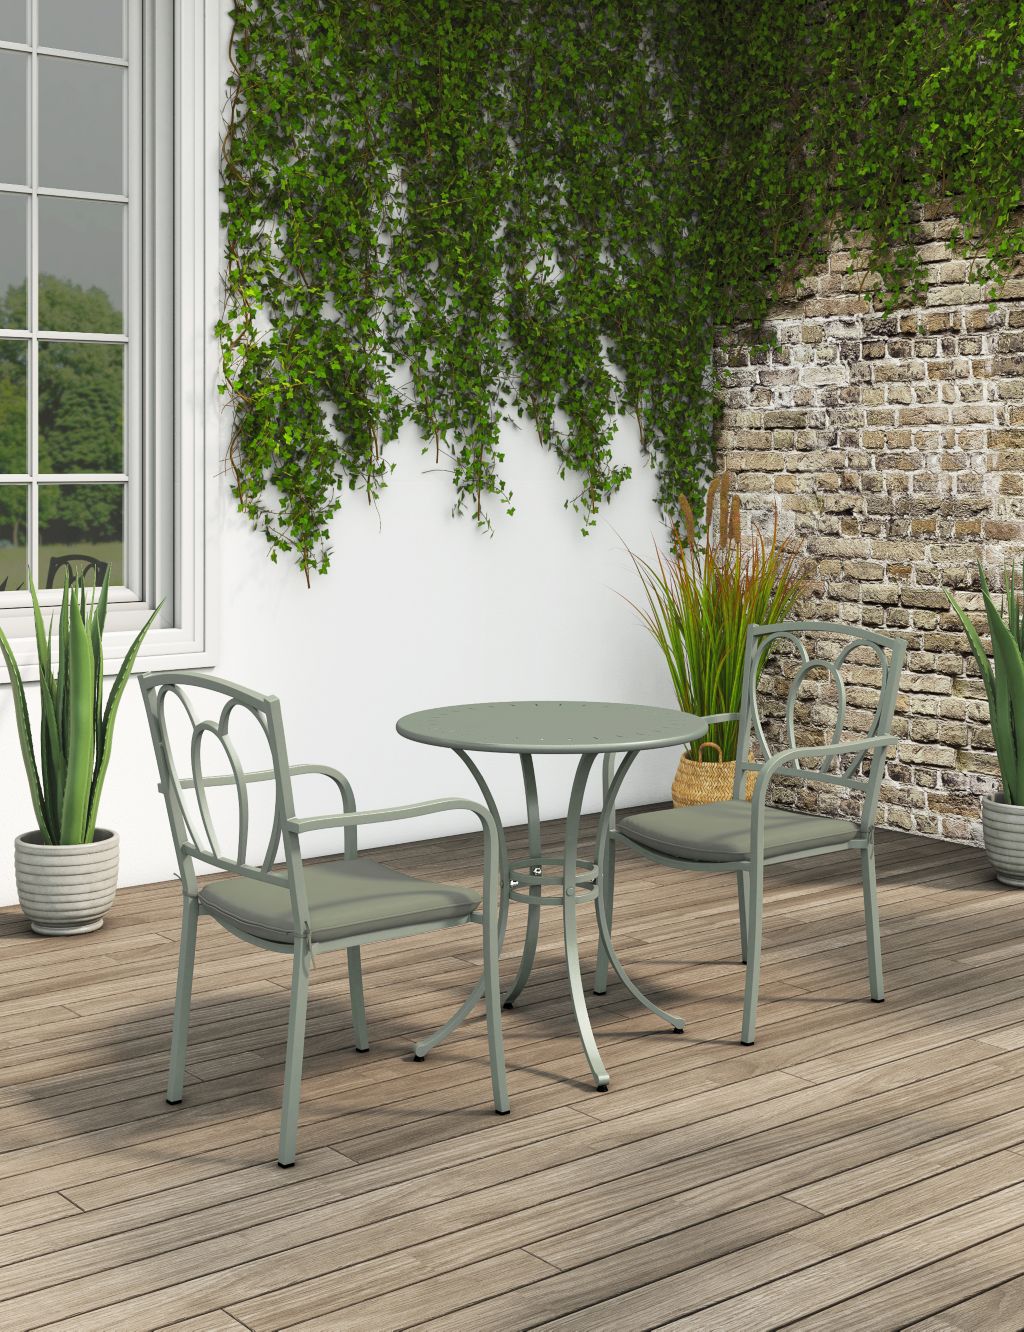 Stroud 2 Seater Bistro Table & Chairs